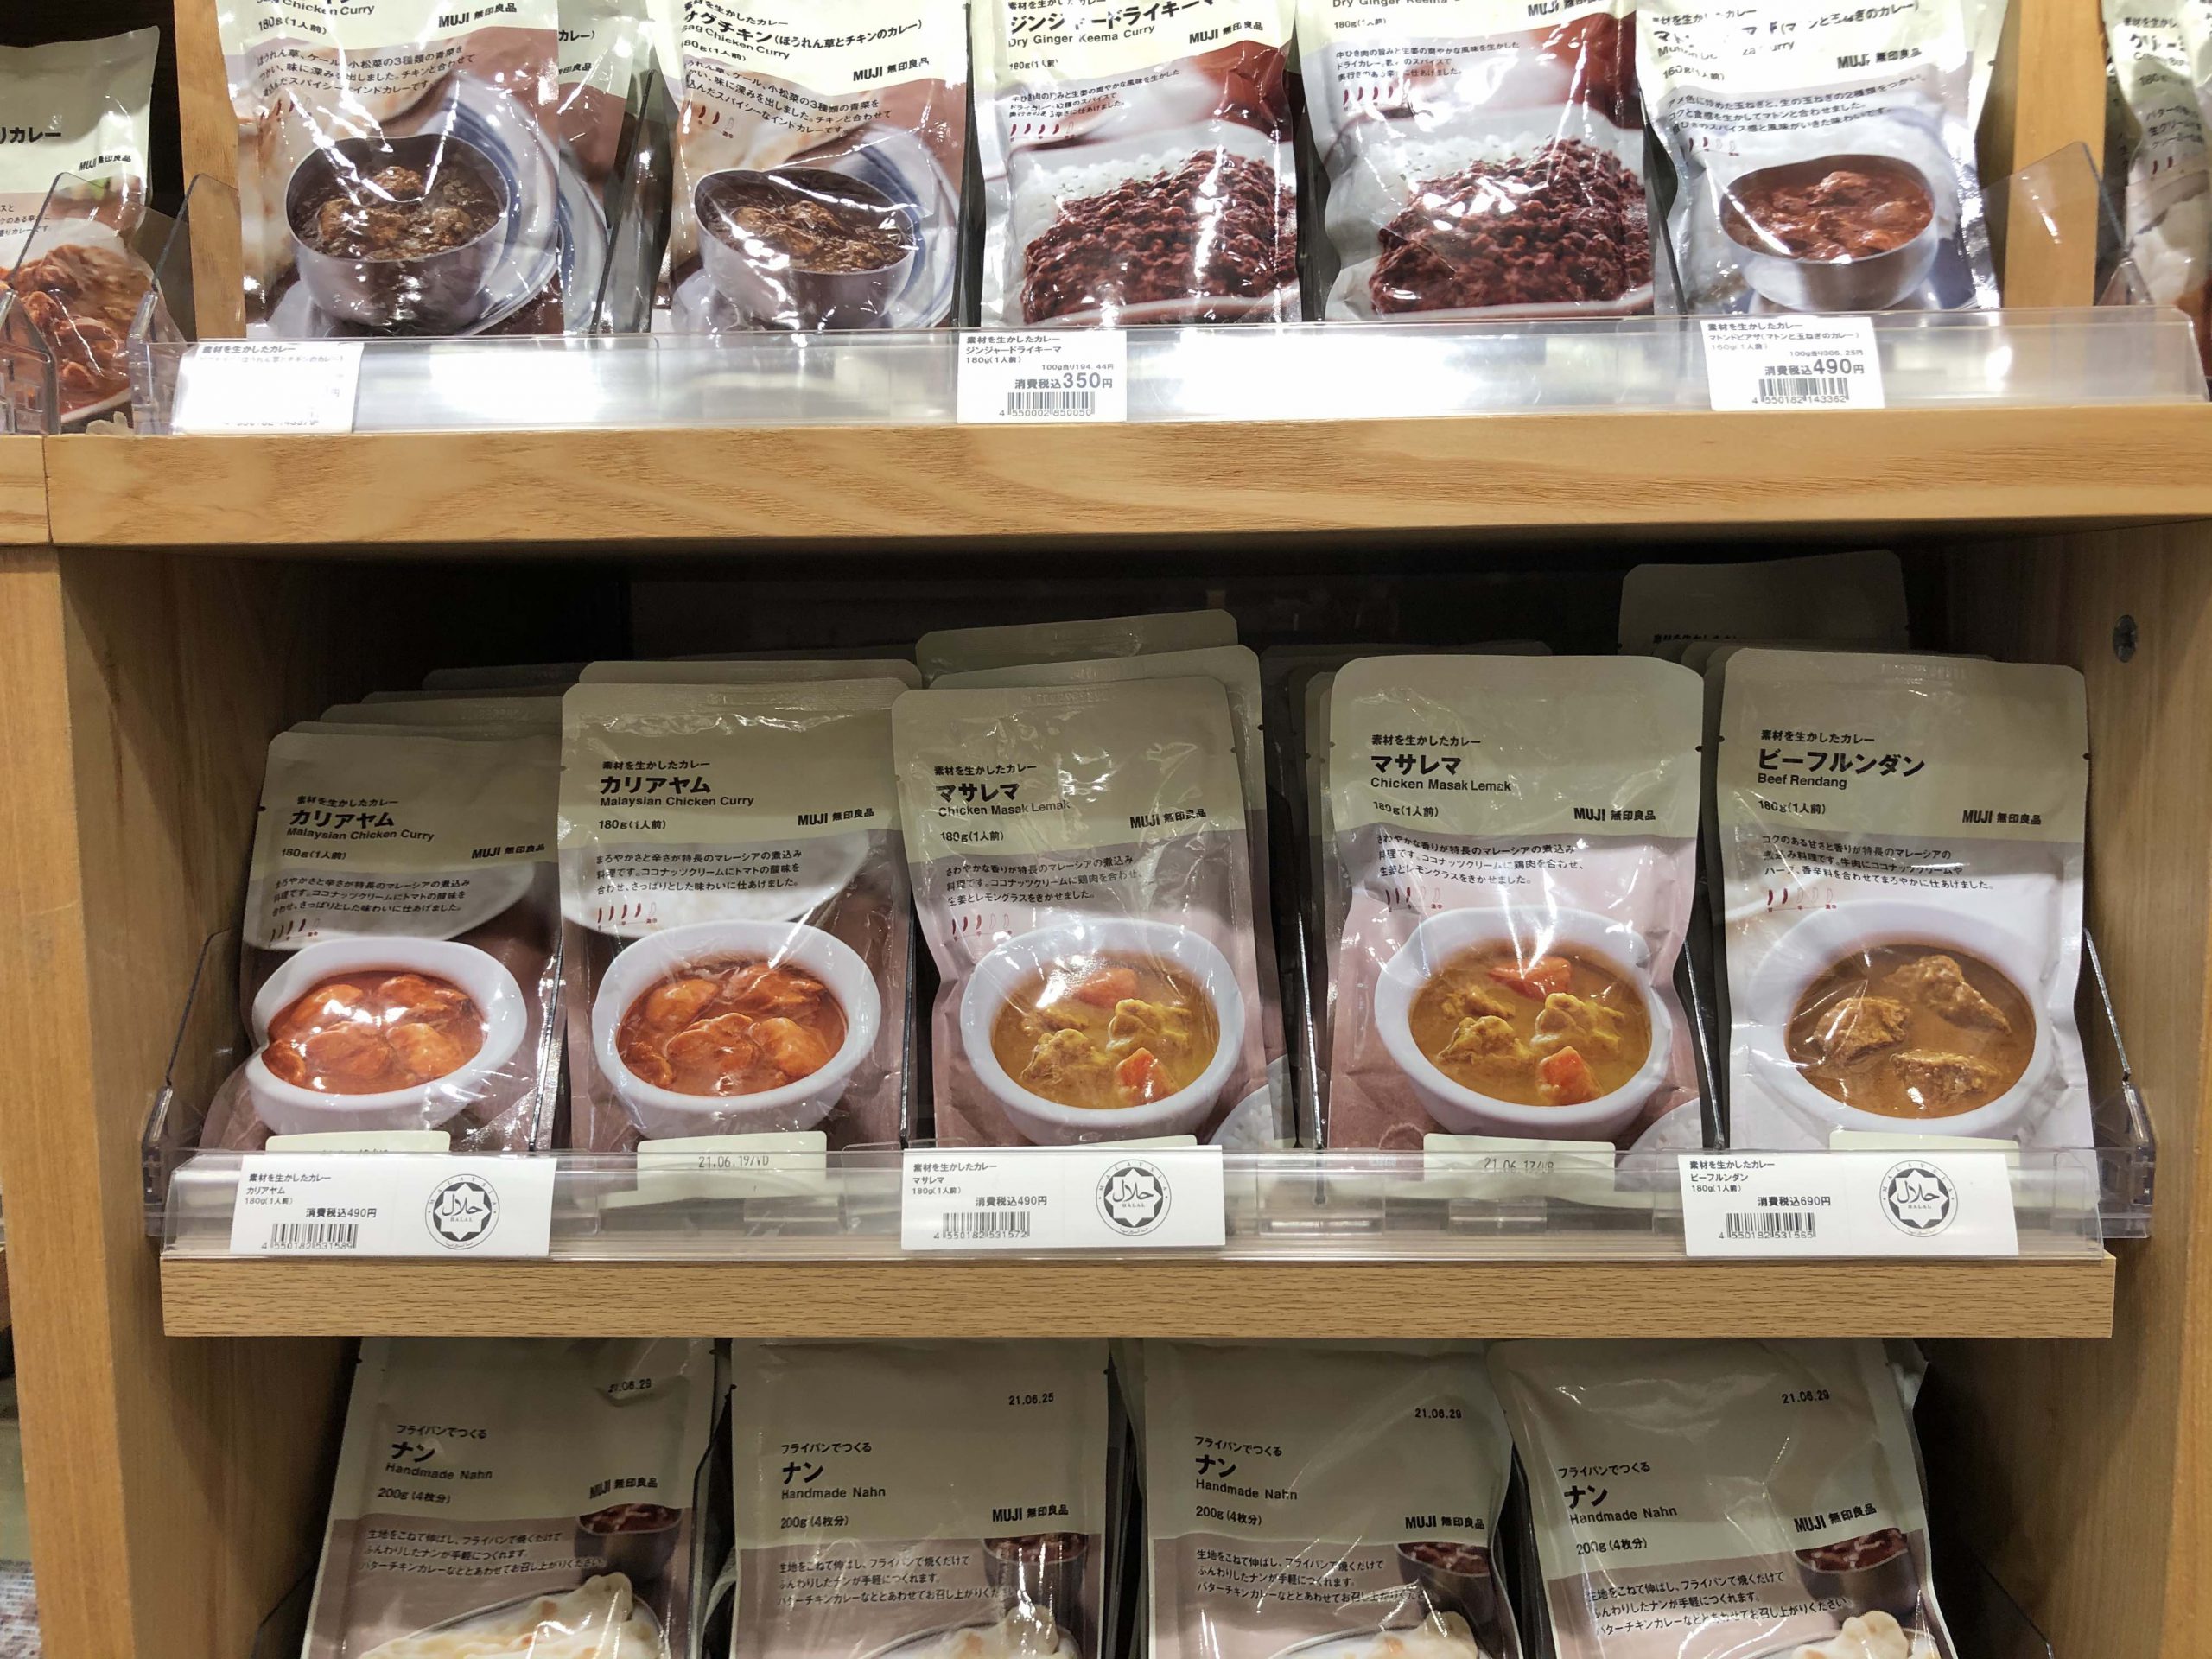 MUJI halal curry available at offline stores